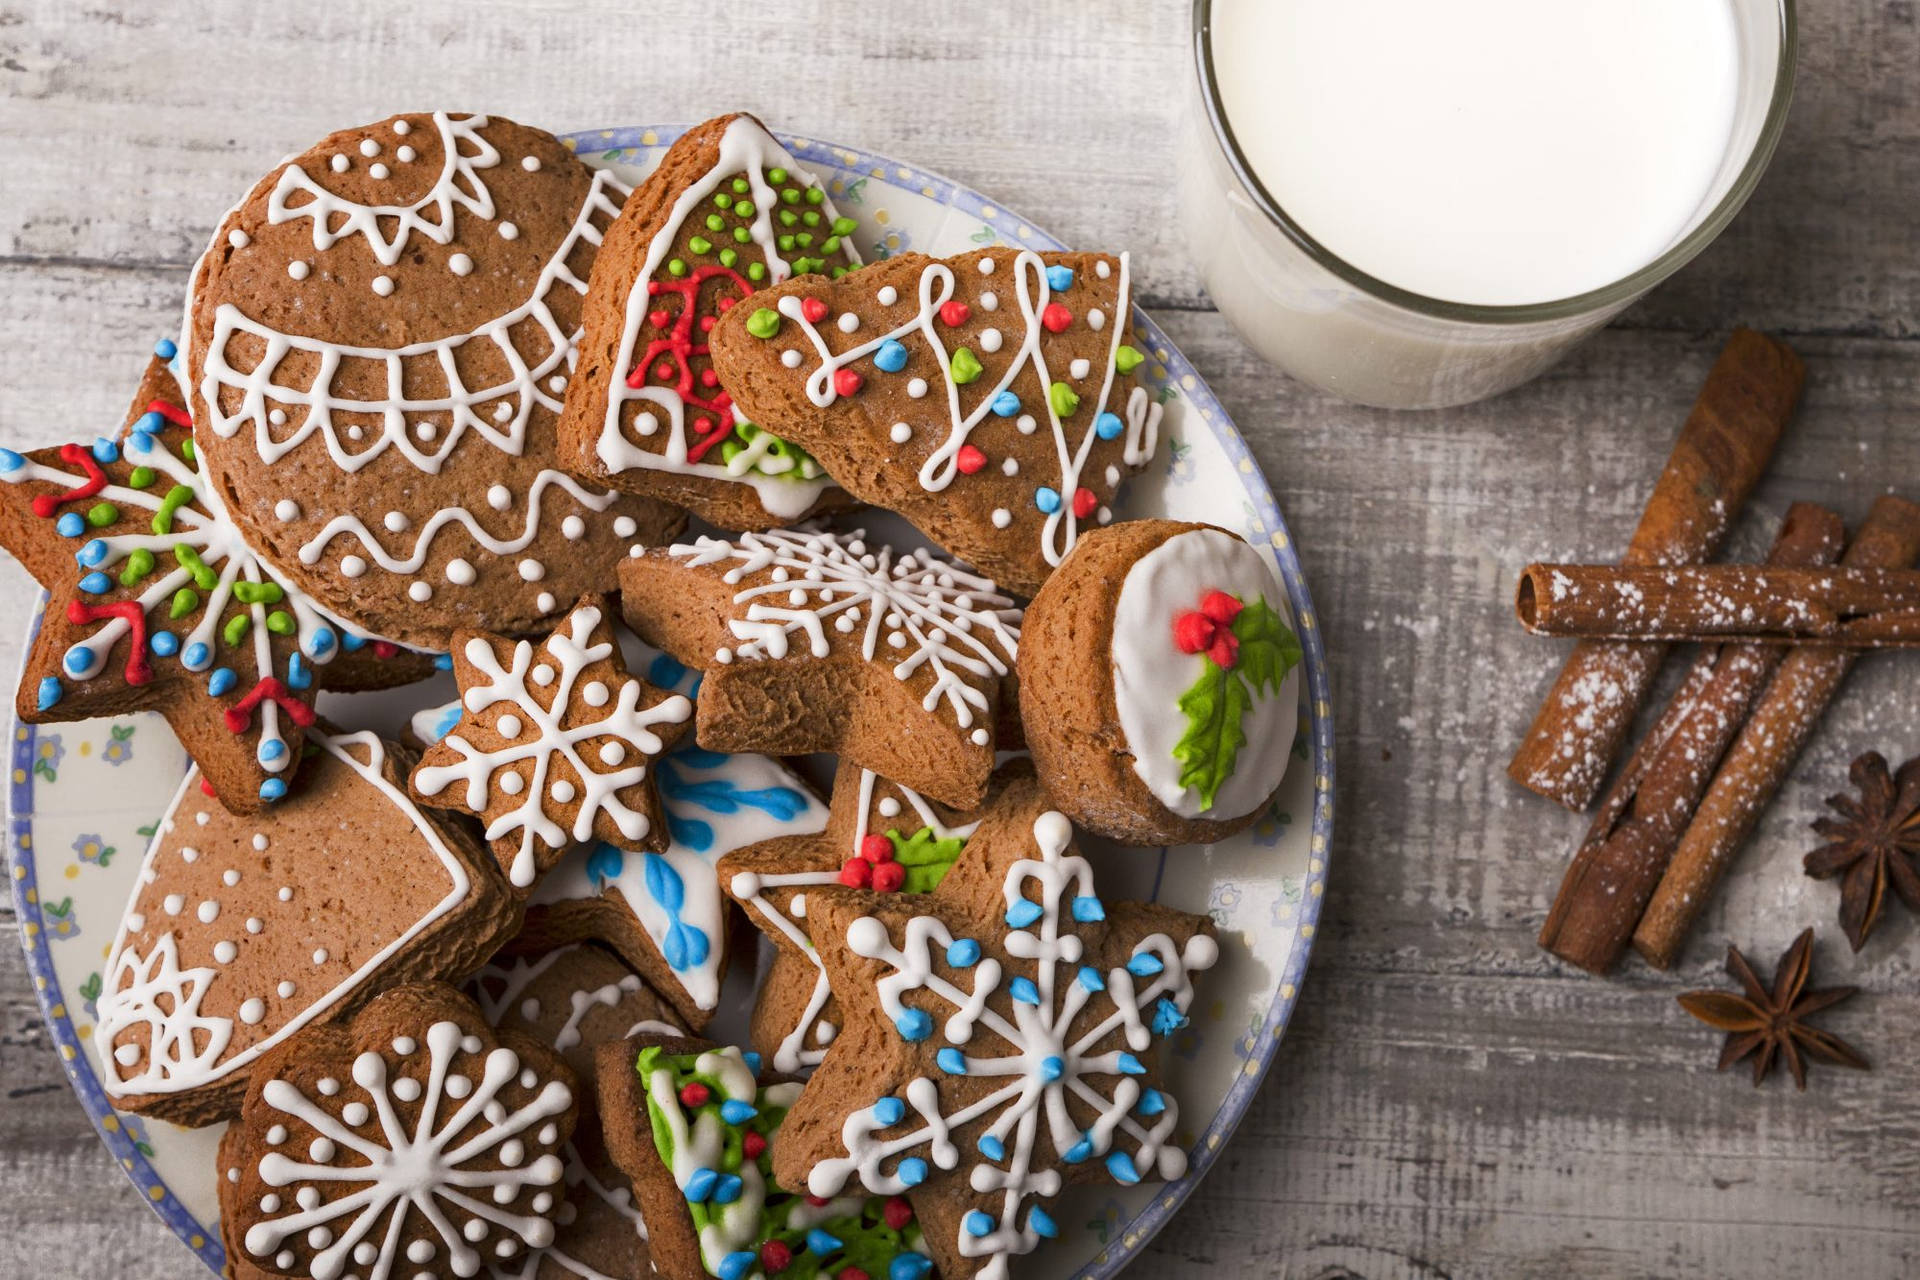 Caption: Delicious Christmas Cookies with Milk and Cinnamon Wallpaper